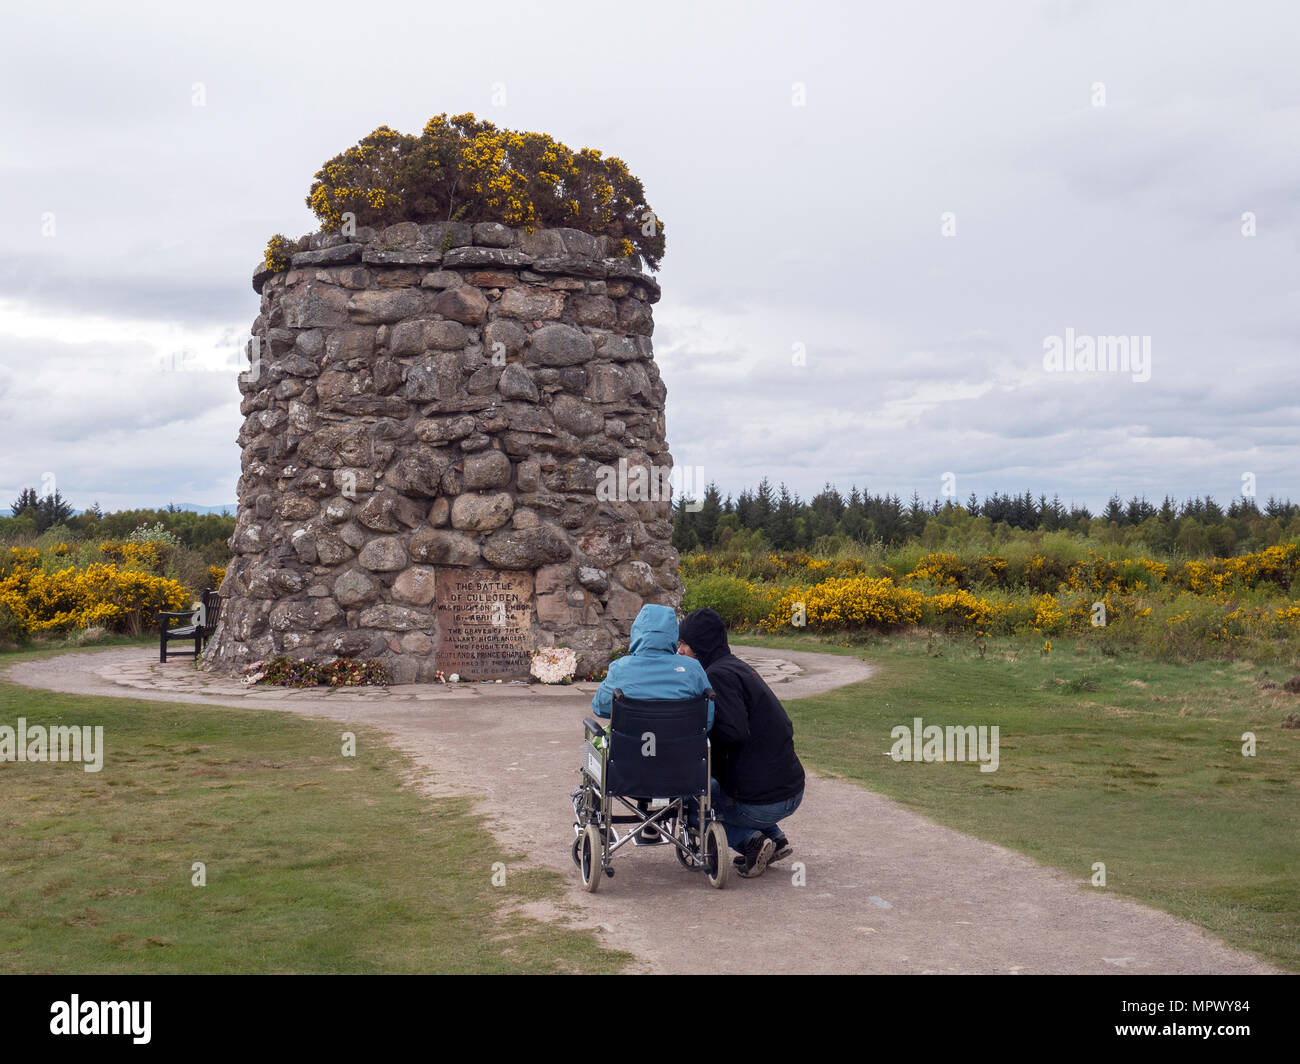 Memorial Cairn at Culloden Moor near Inverness, Scottish Highlands, site of the Battle of Culloden, 16 April 1746. Stock Photo